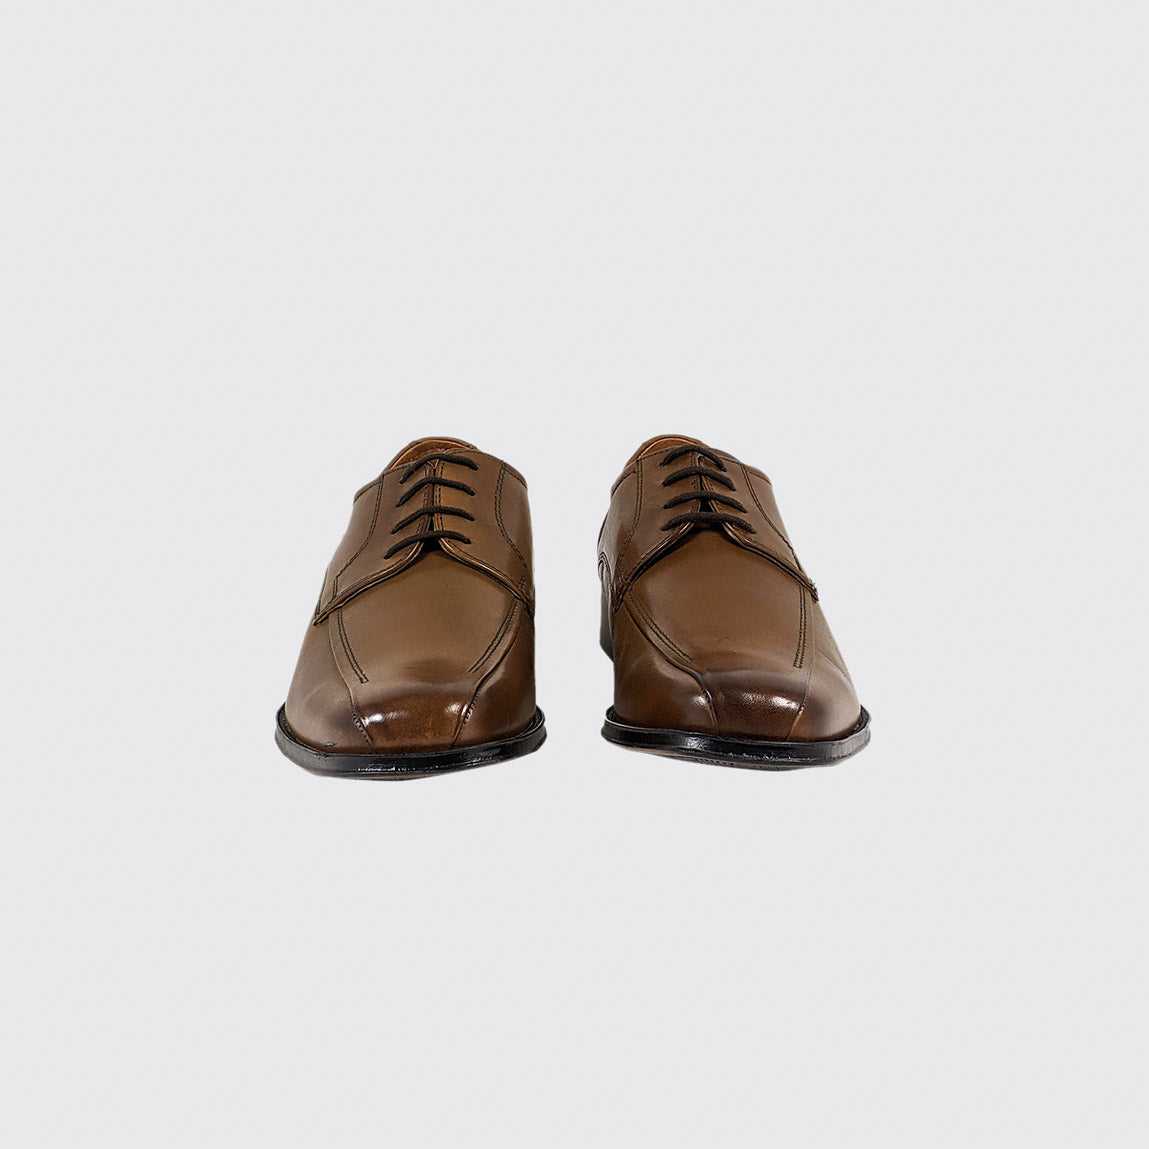 A front view of the pair of Dubarry Davey Tan shoes.